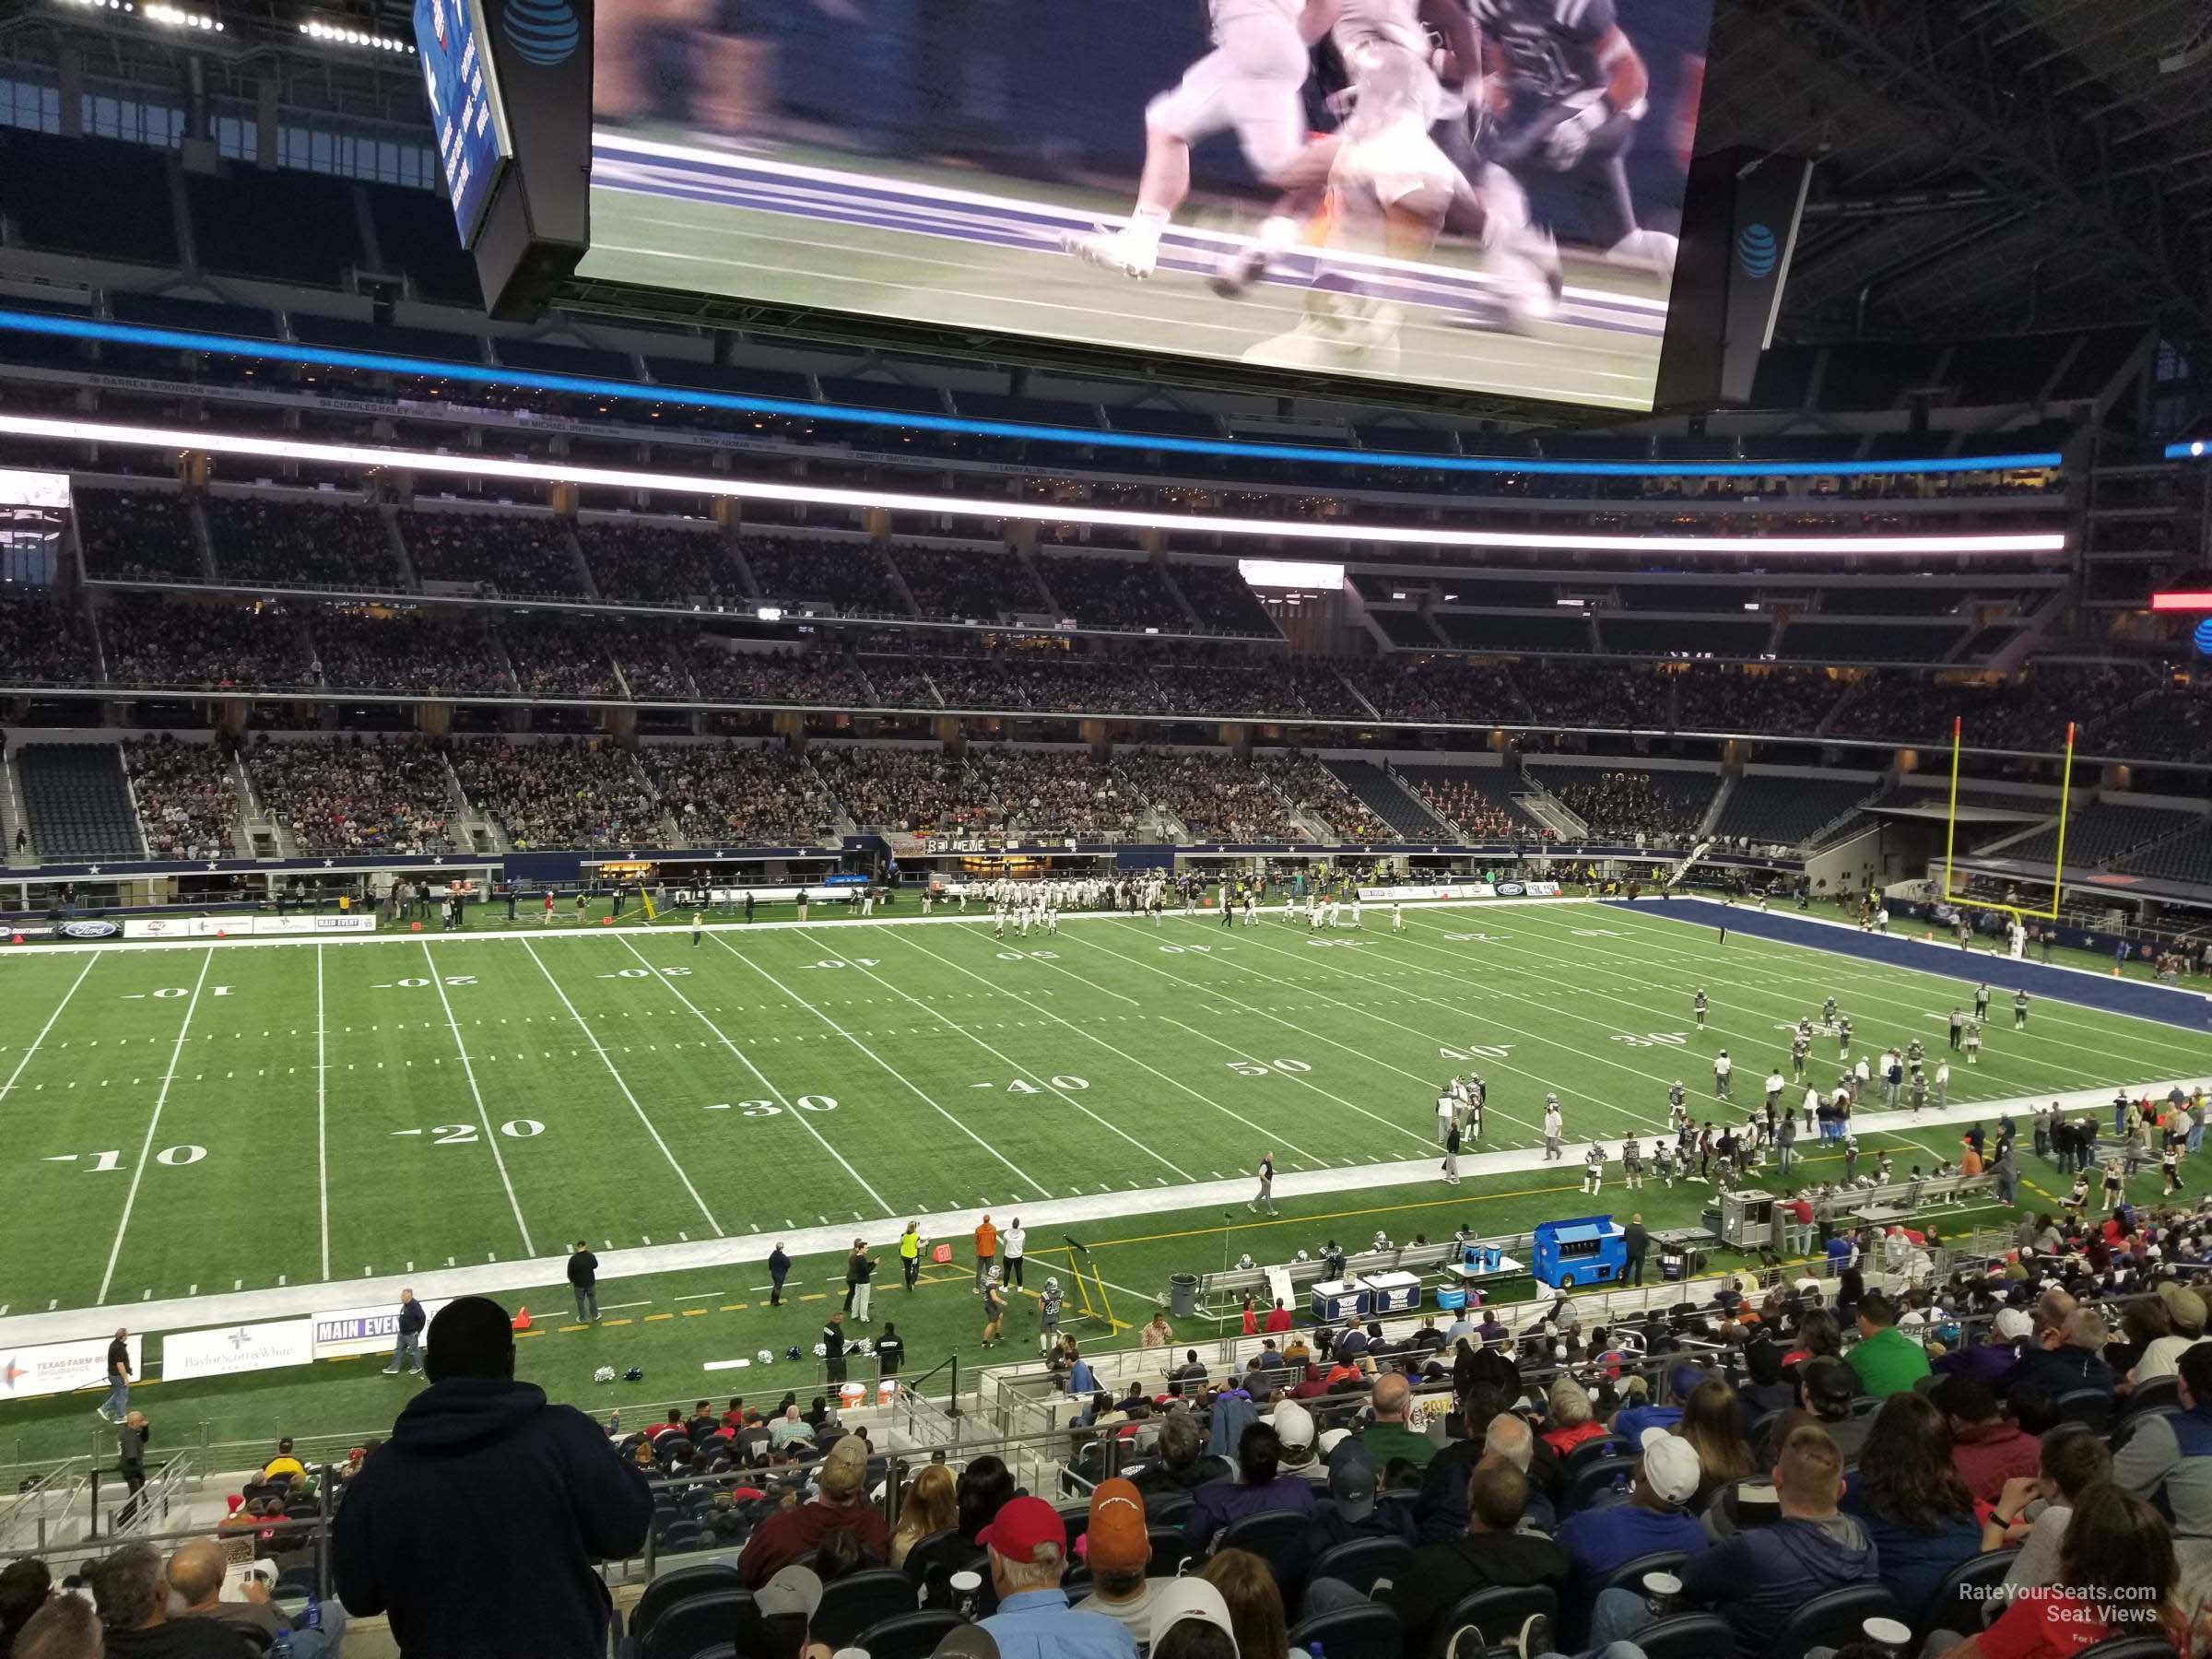 section c213, row 10 seat view  for football - at&t stadium (cowboys stadium)